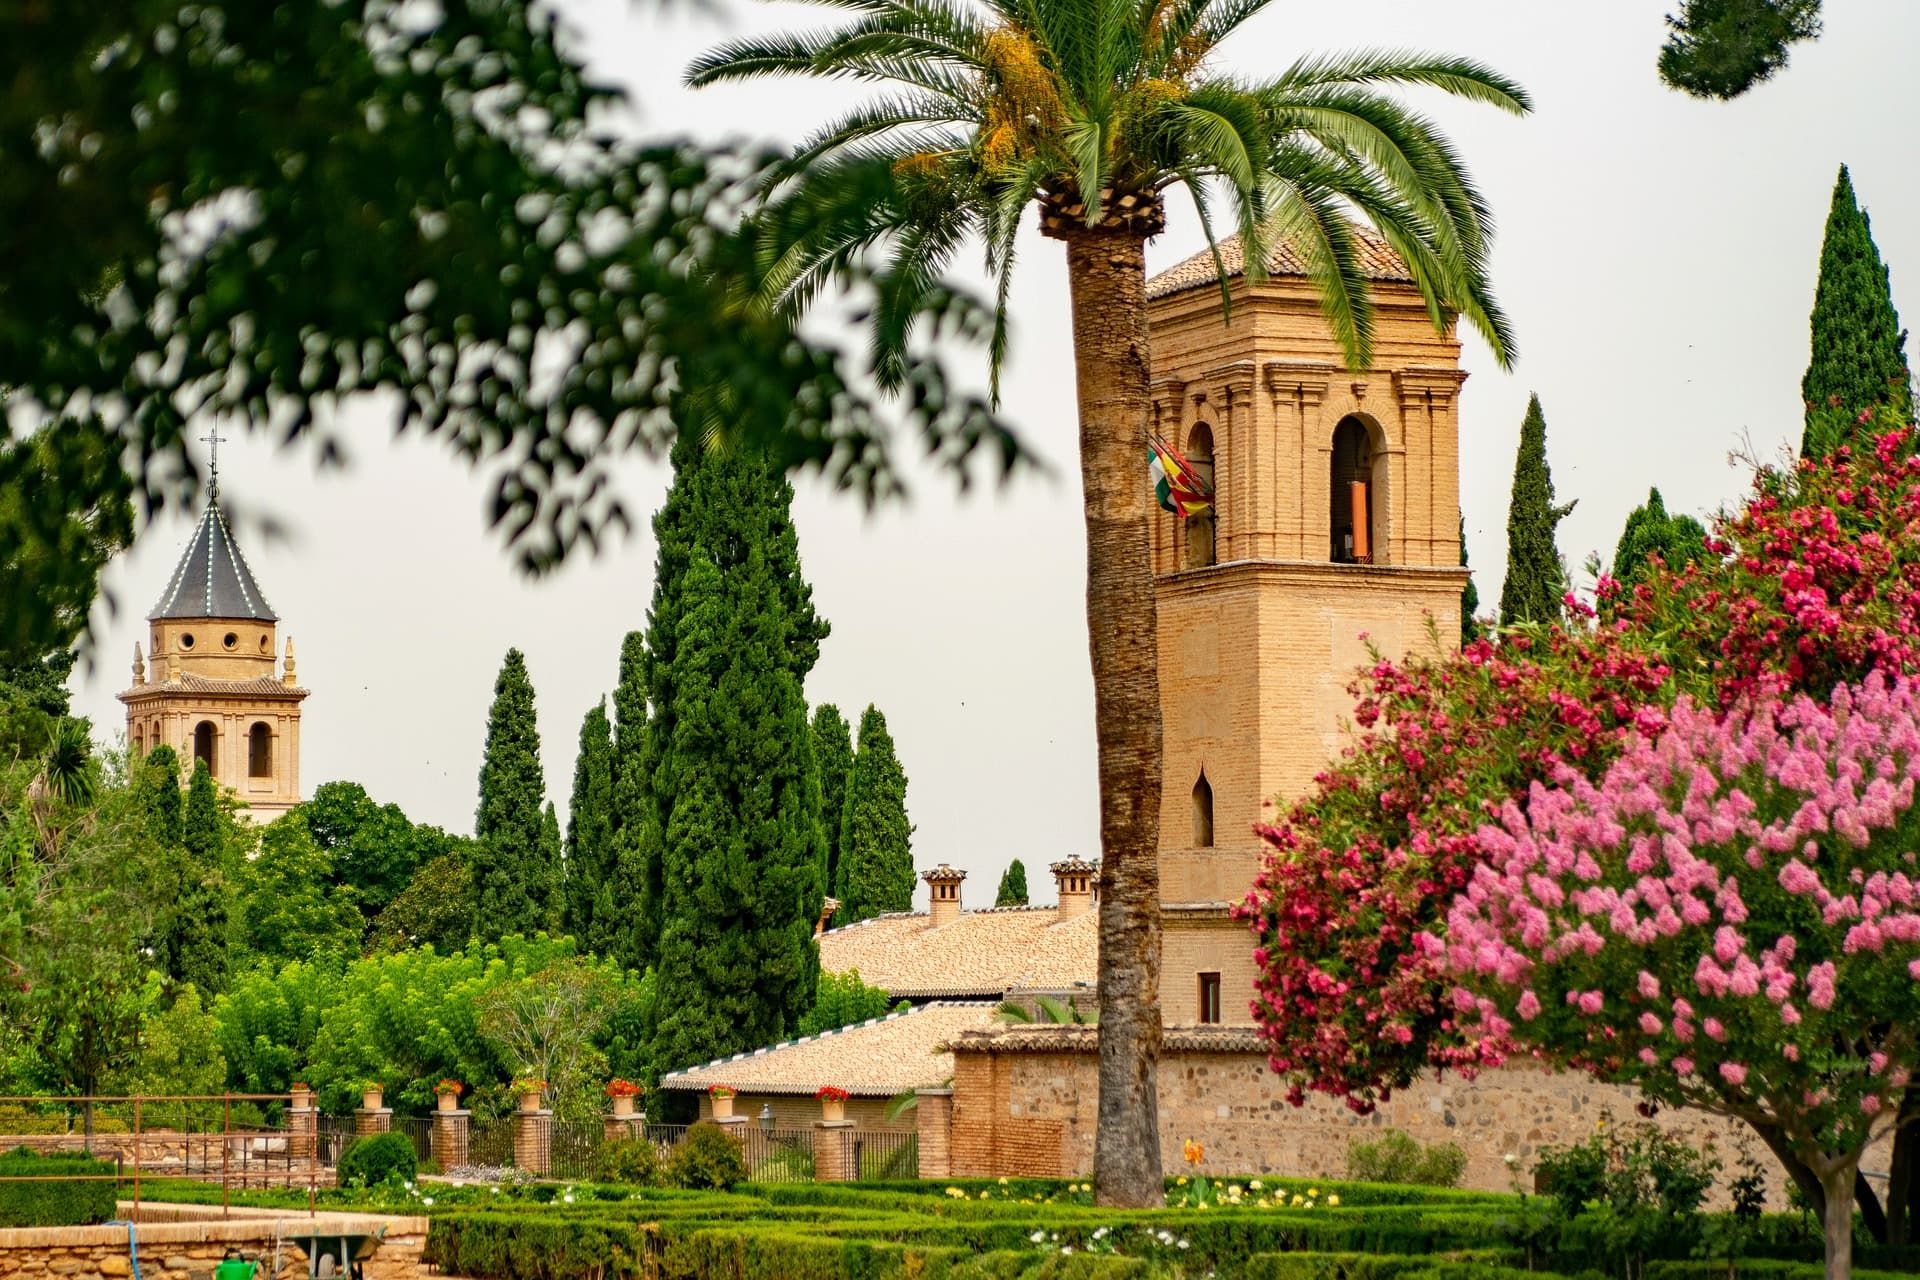 Two-day getaway to Granada: What to see